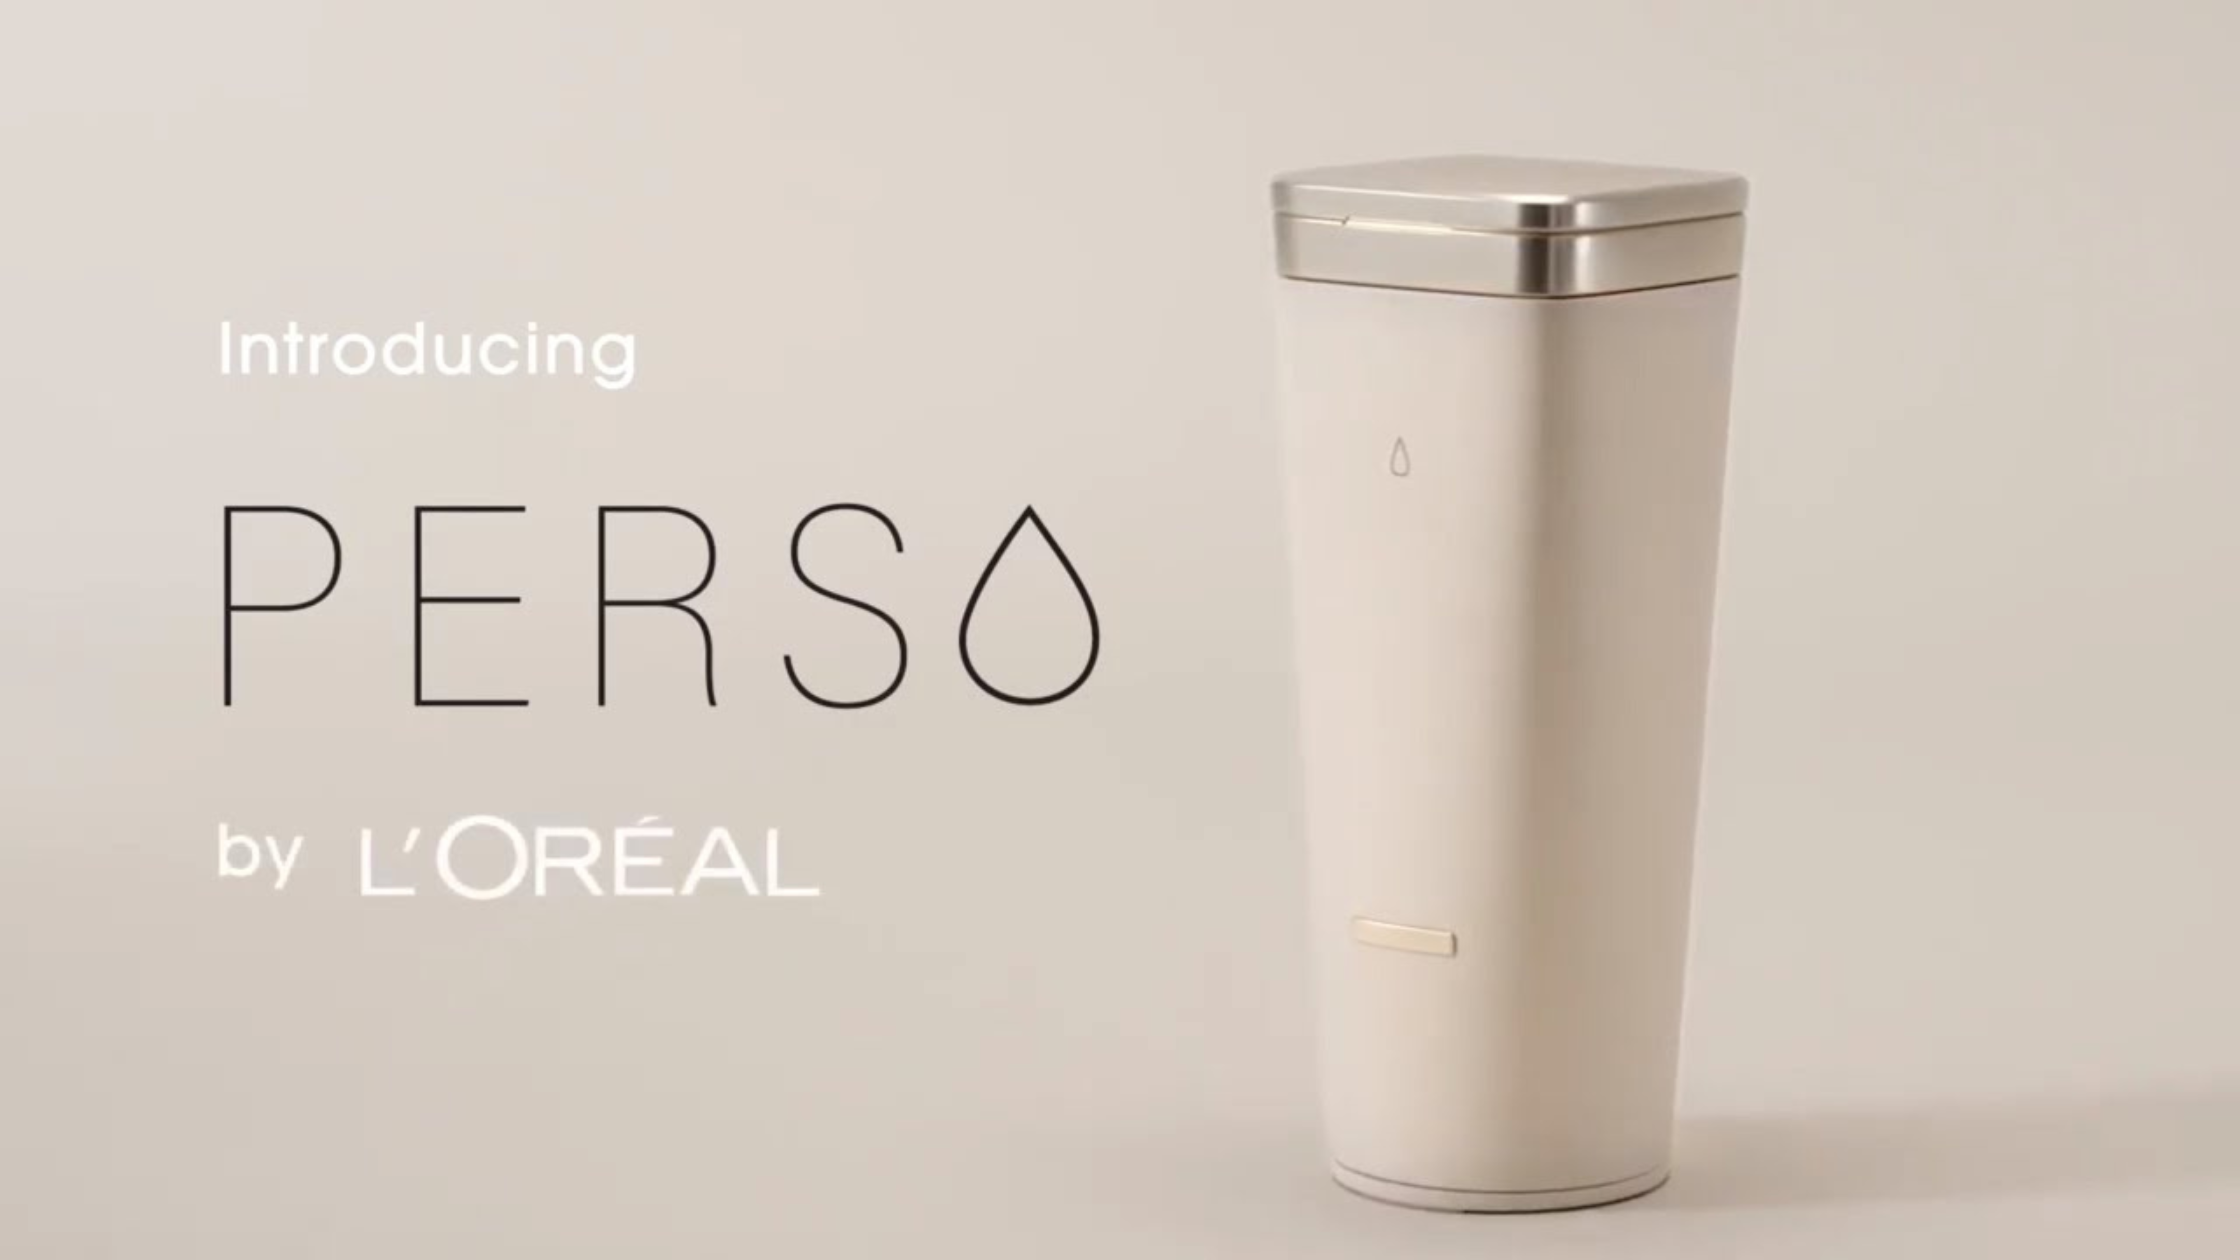 Perso by Loreal will go beyond hyper-personalization trend in 2023 creating custom formulations